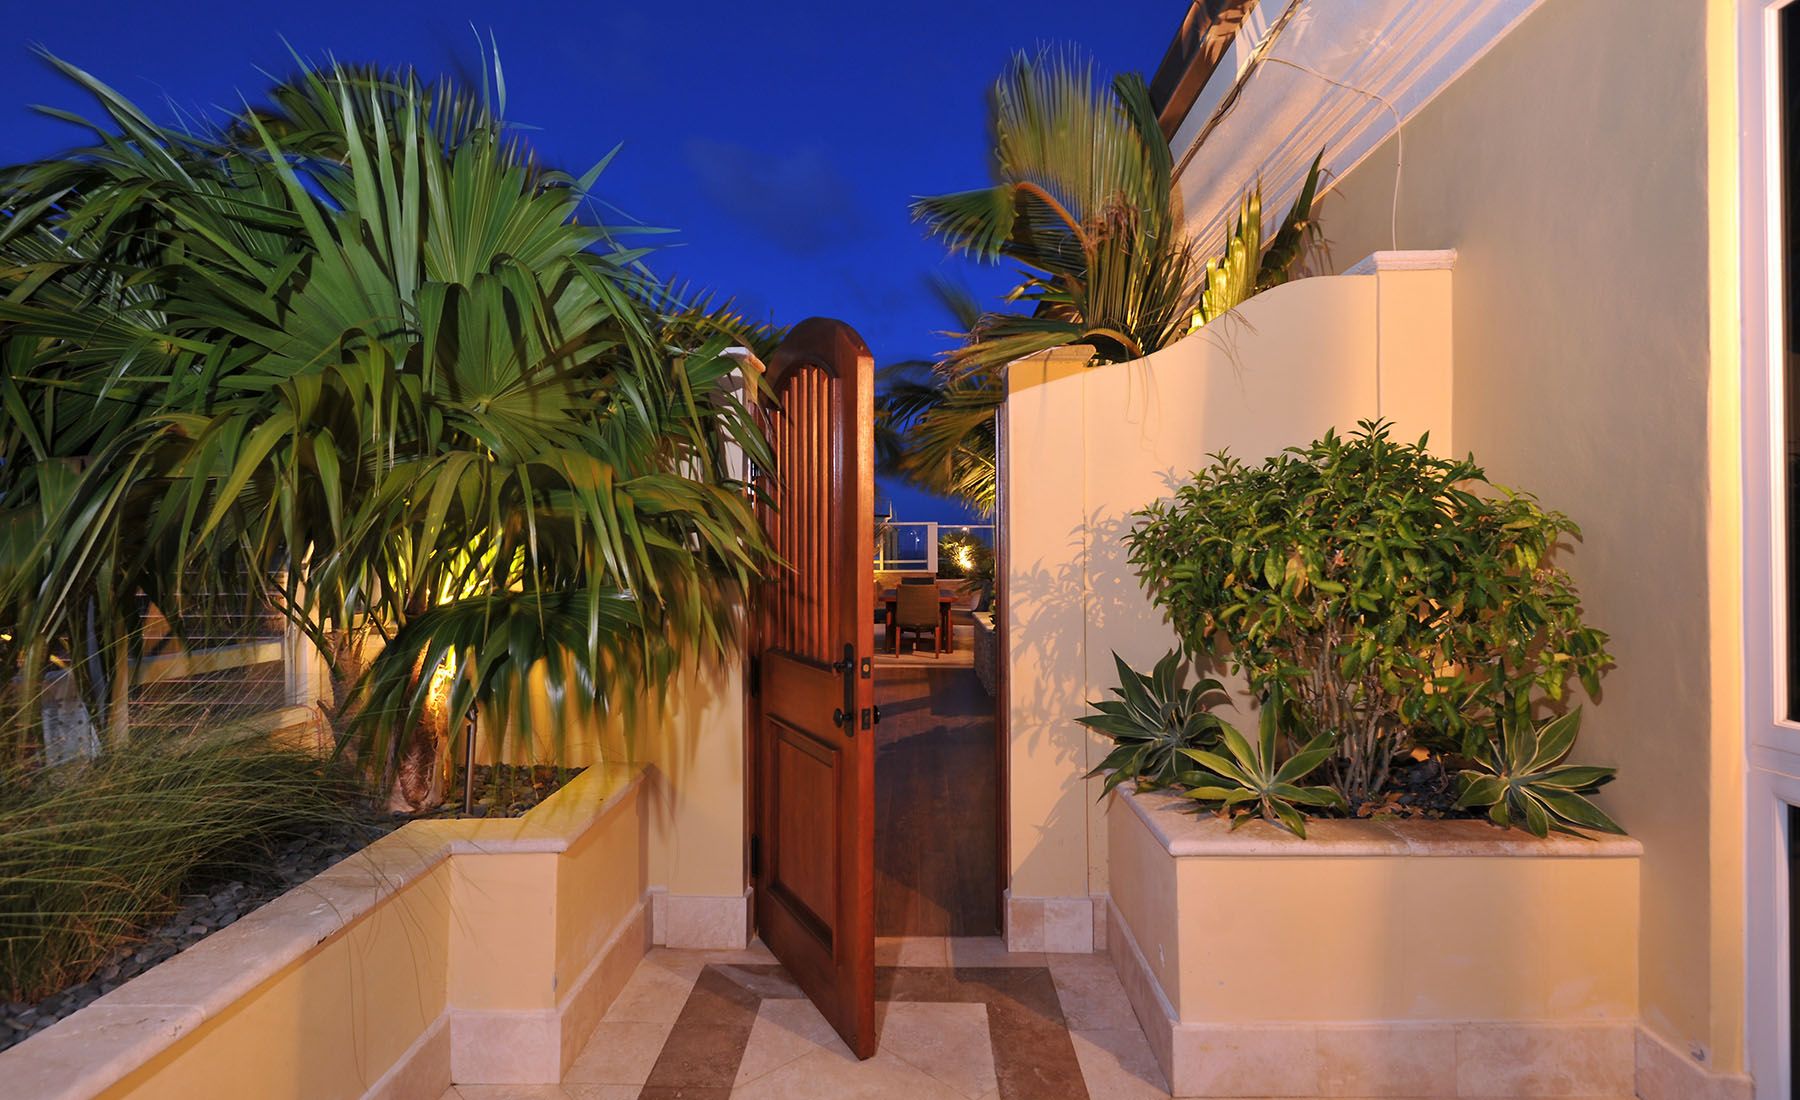 Experience the enchanting night view of the inviting entrance